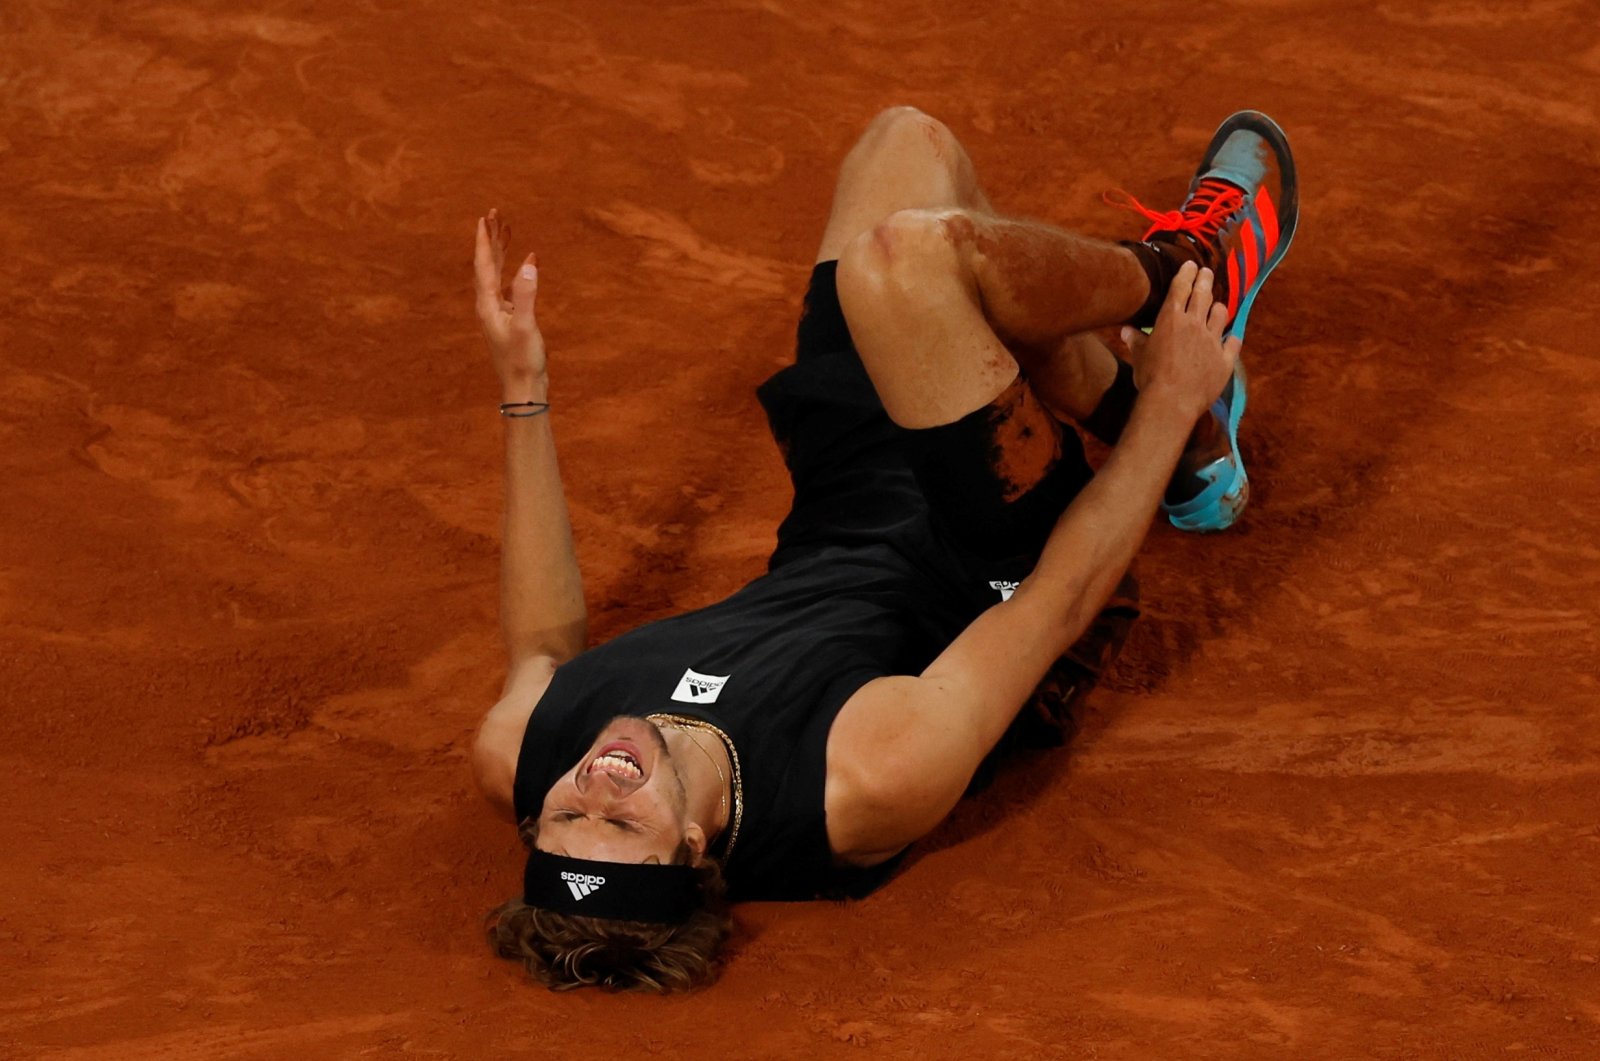 World No. 2 Zverev pulls out of US Open with ankle injury | Daily Sabah